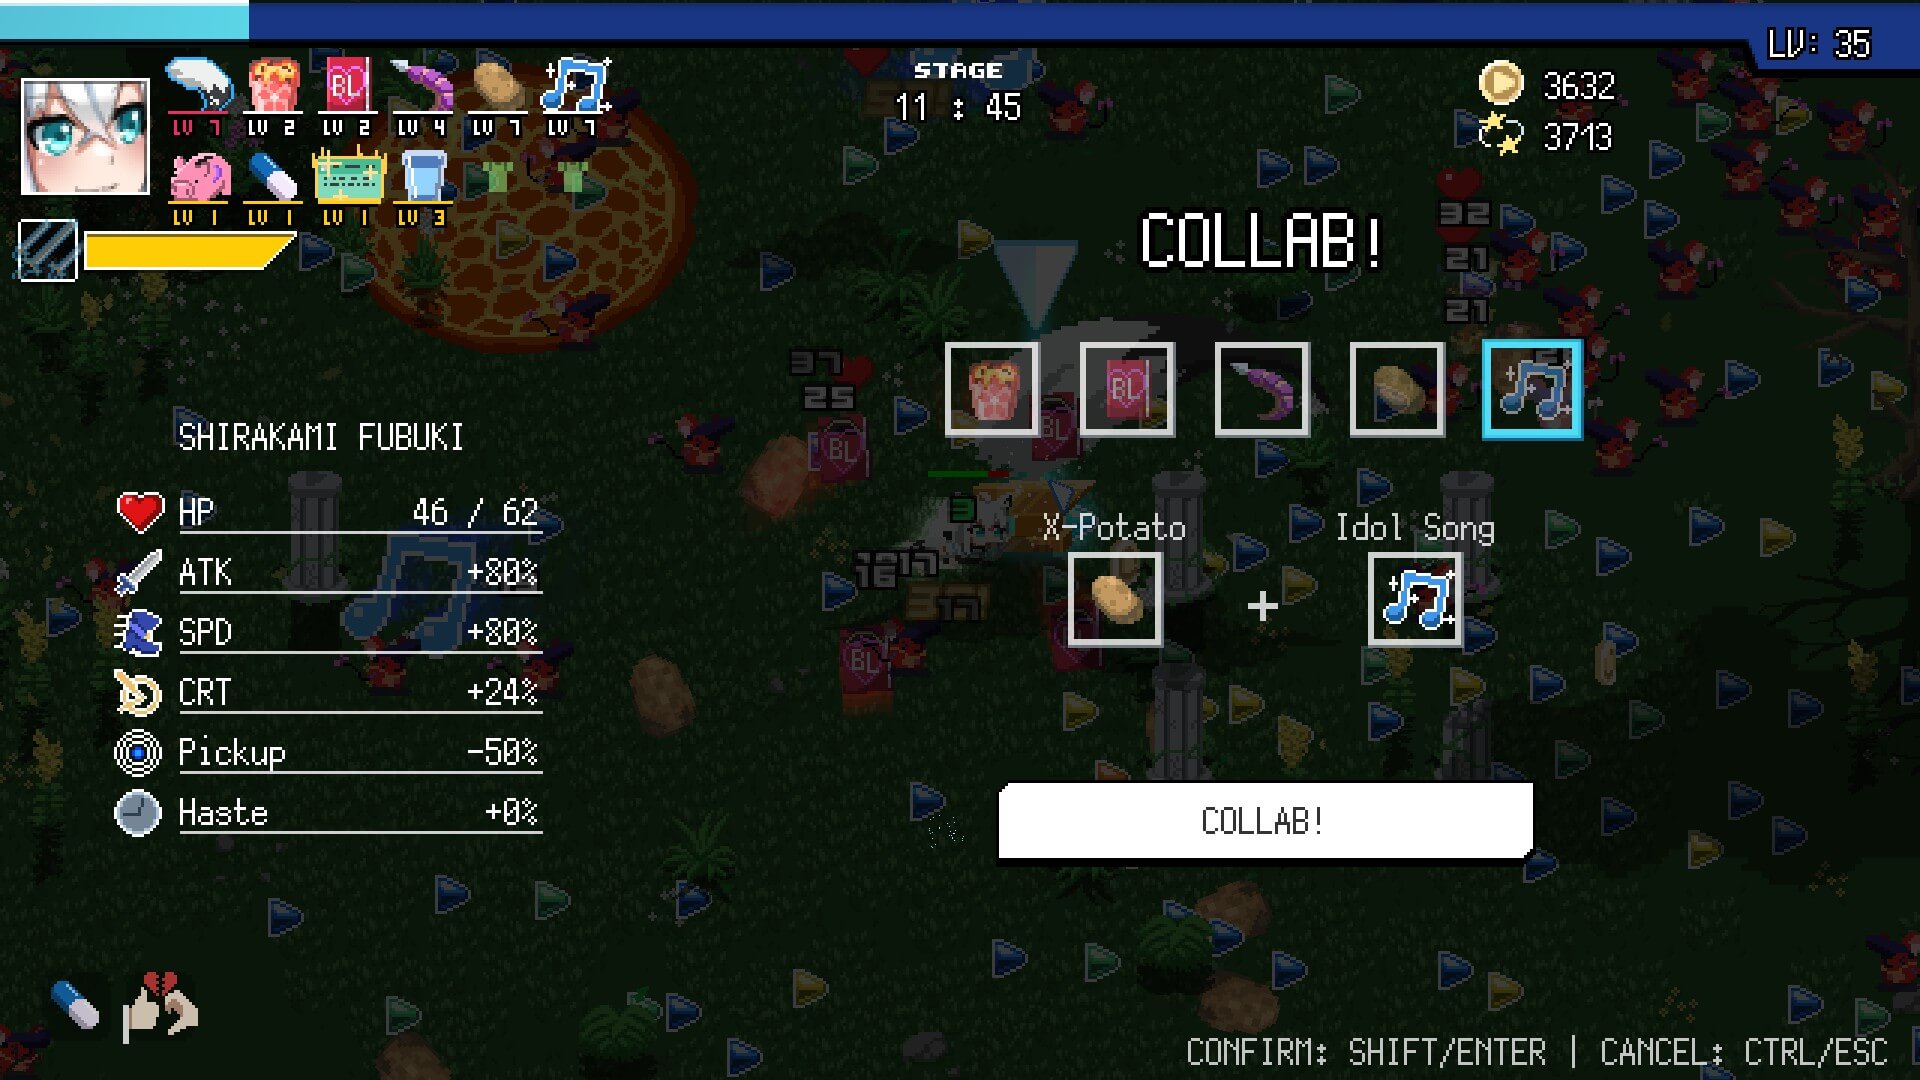 HoloCure screenshot showing the X-Potato and Idol Song weapons being combined in the Collab menu.